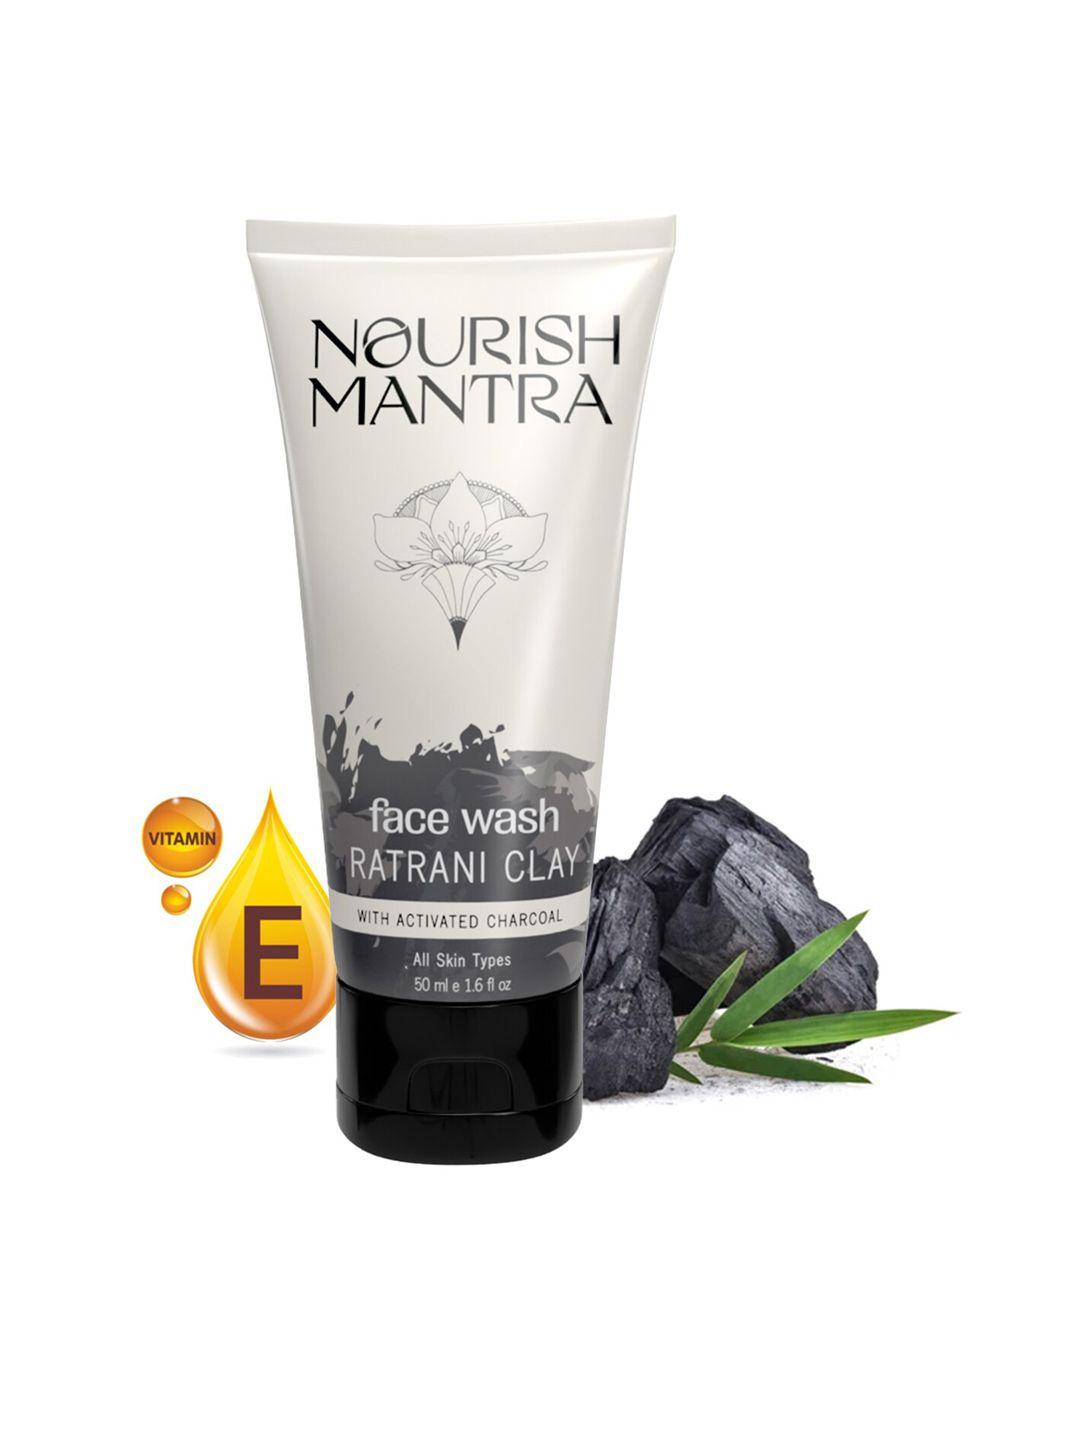 nourish mantra ratrani clay moroccan lava face wash with activated charcoal - 50 ml